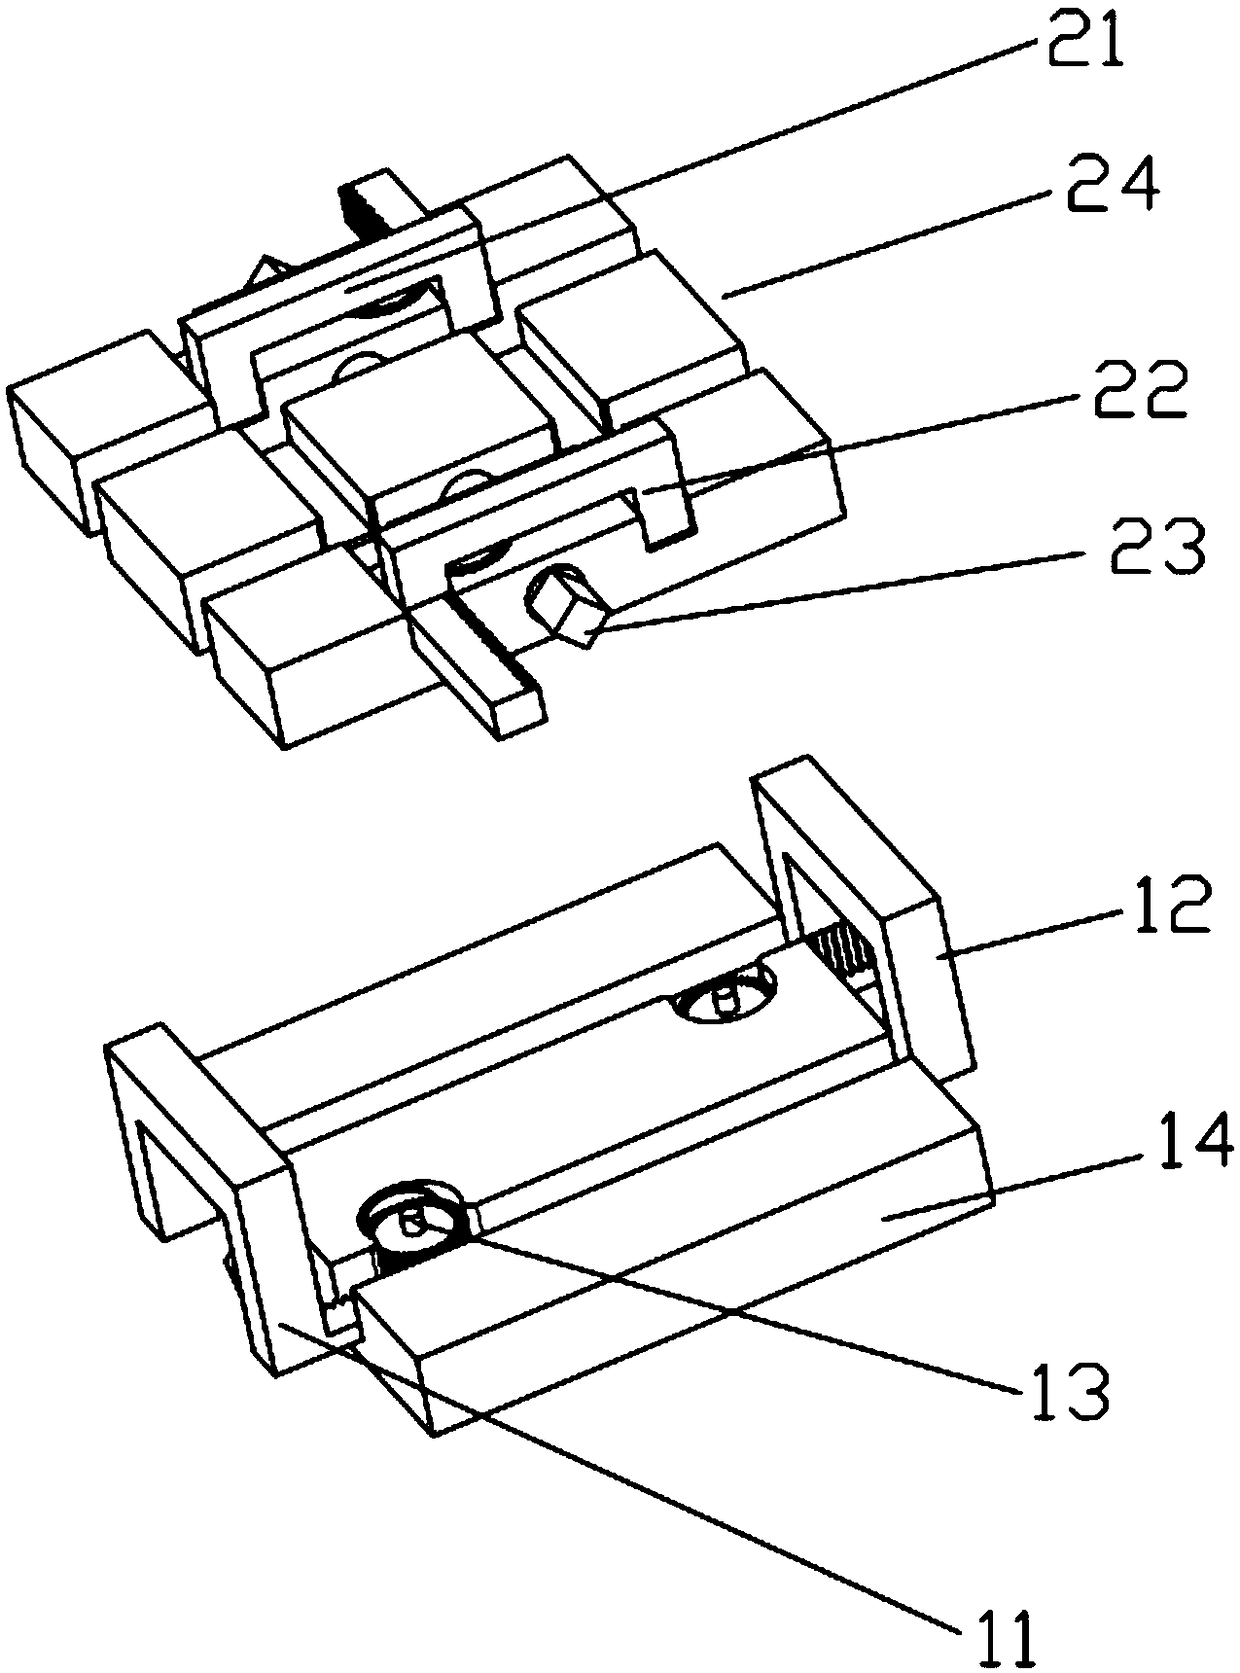 Four-direction fixing linkage clamp